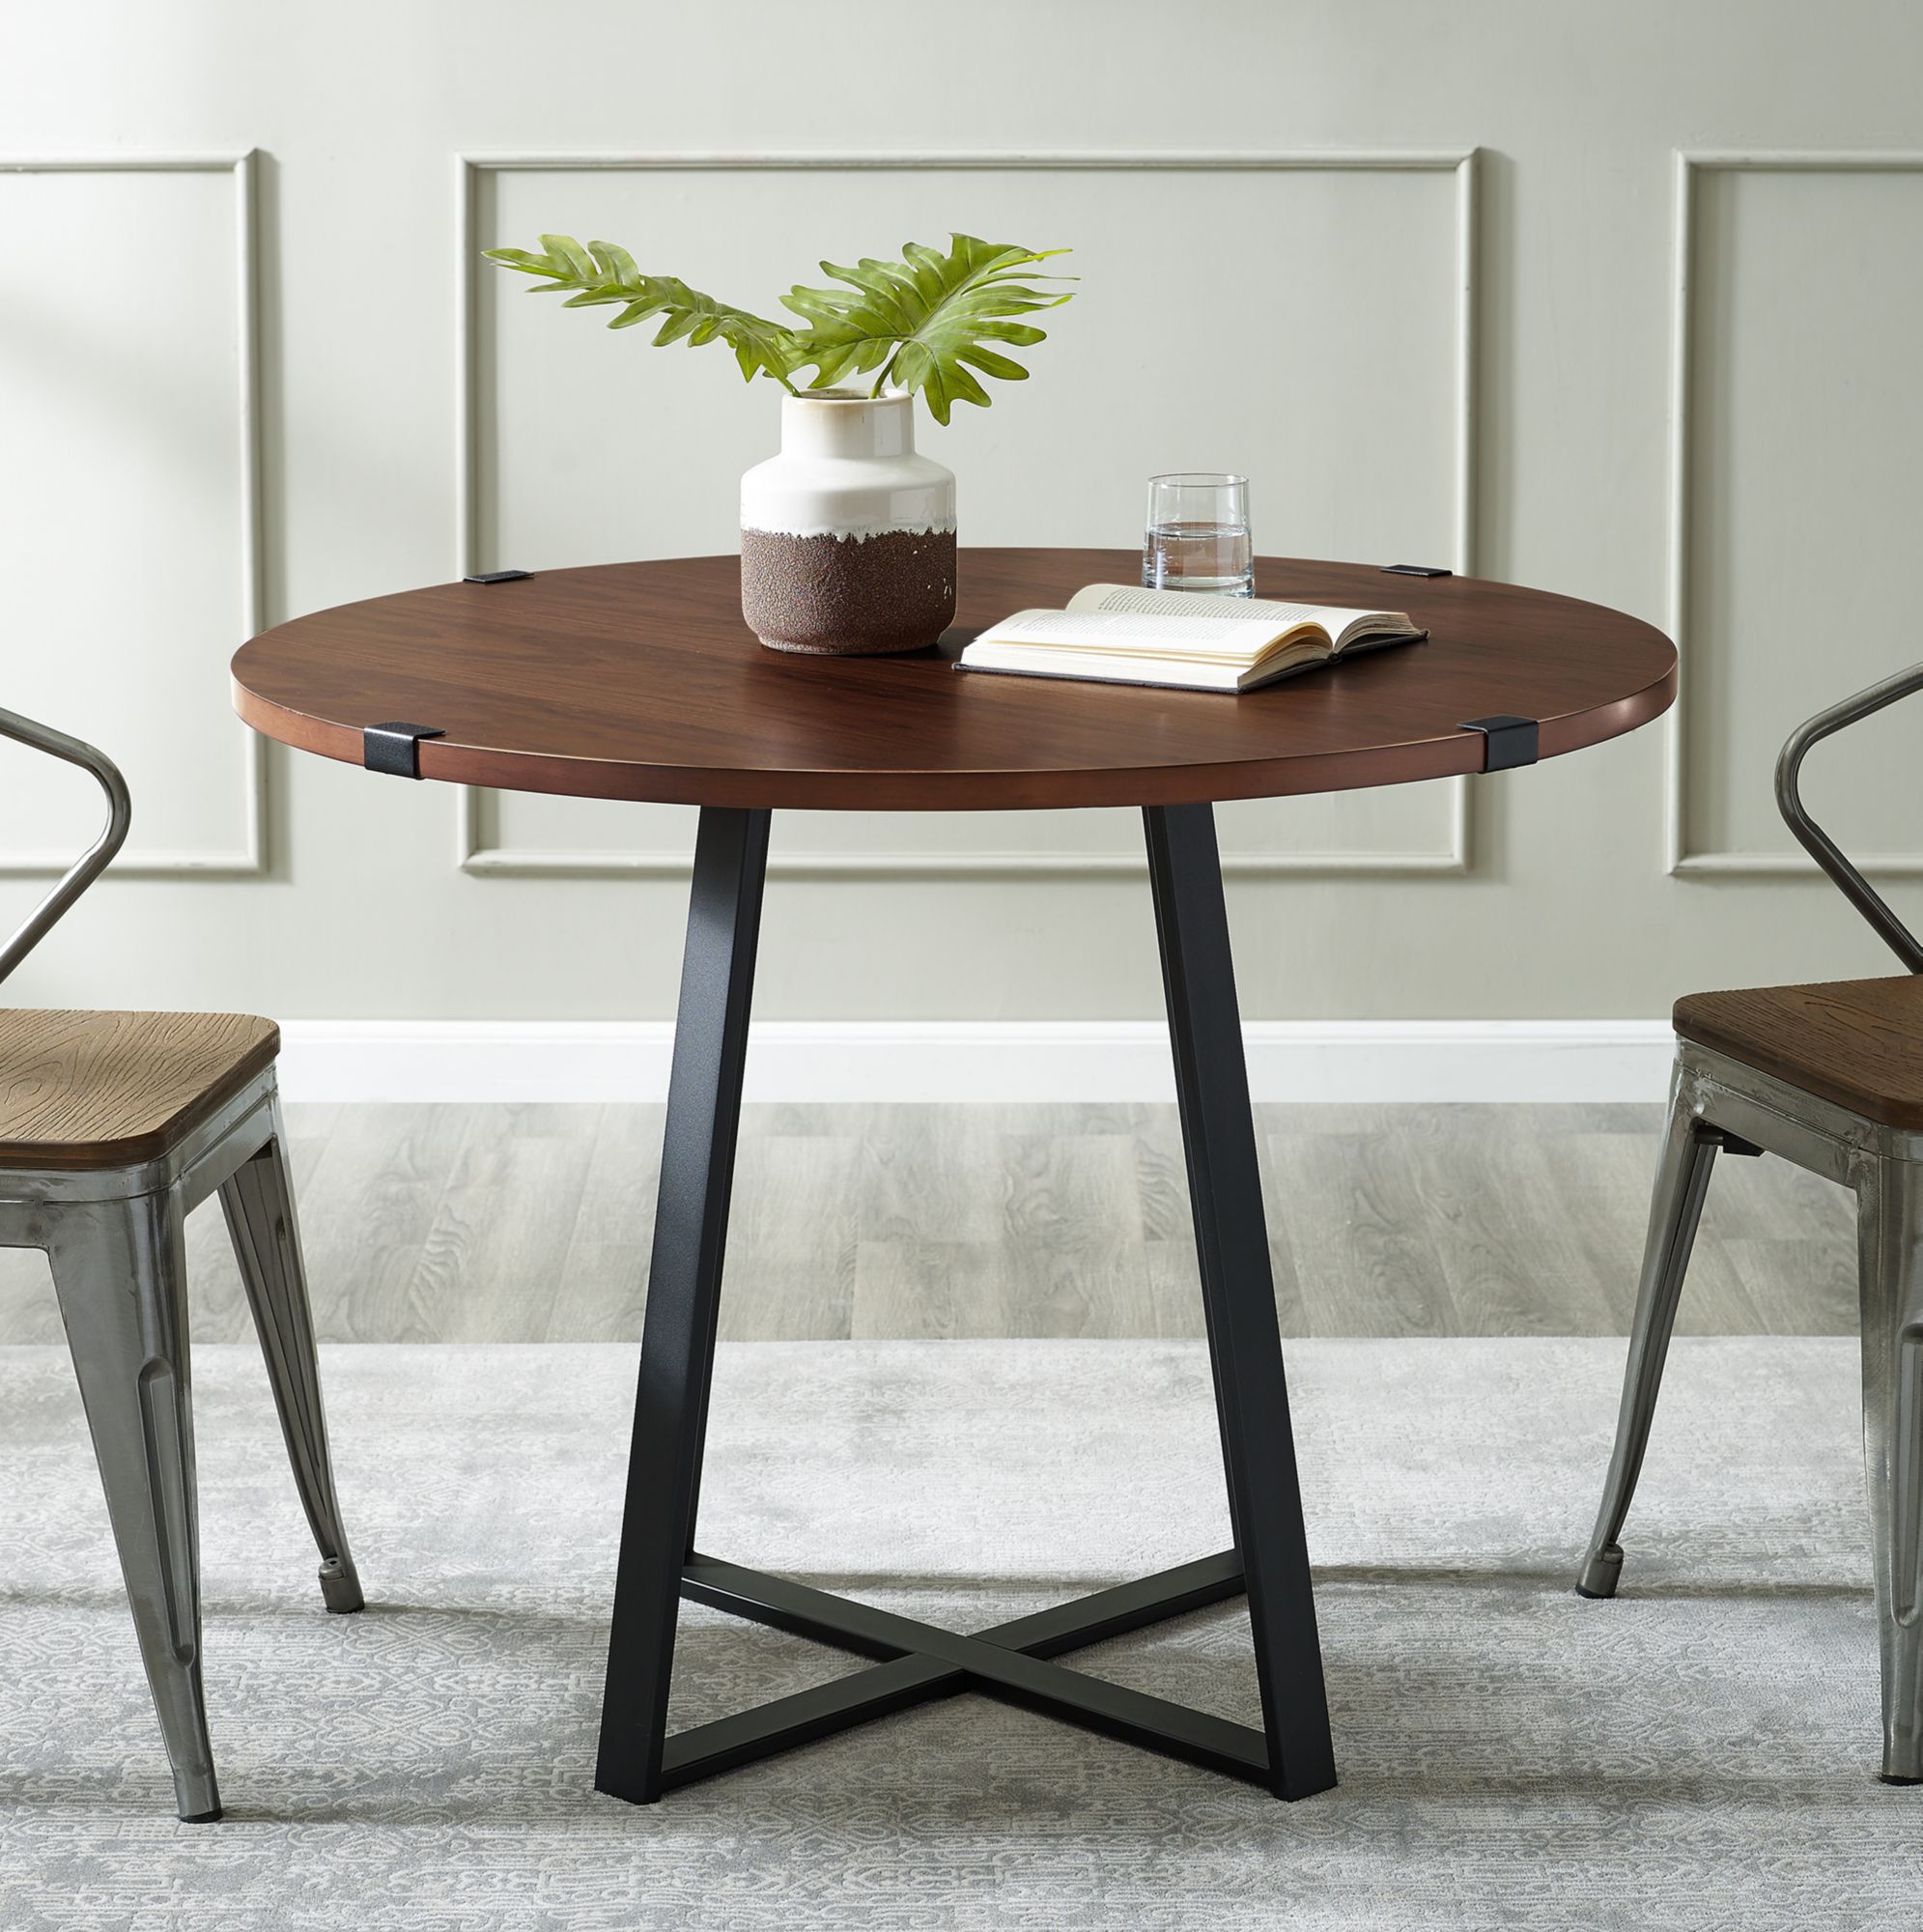 W Trends Farmhouse Round Kitchen Dining Table